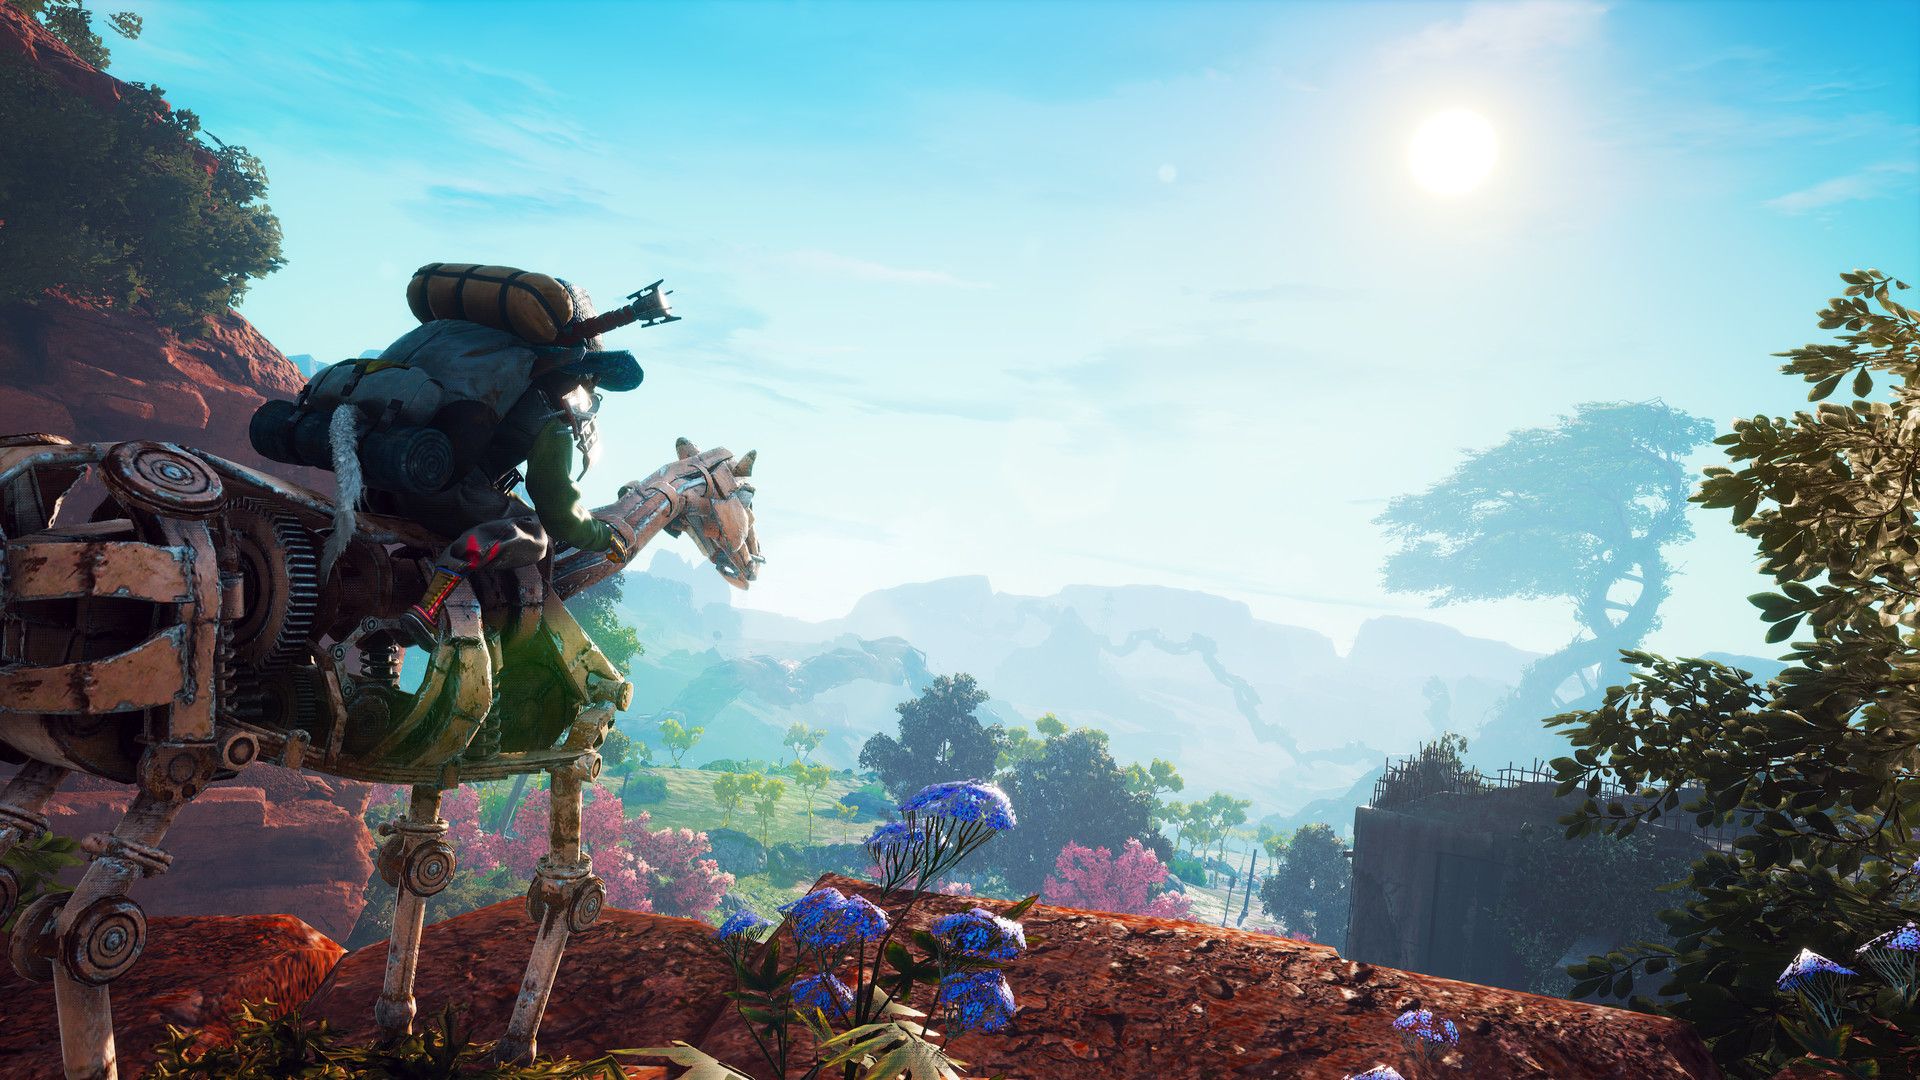 Biomutant Gameplay Trailers Showcase PS4 and Xbox One Performance